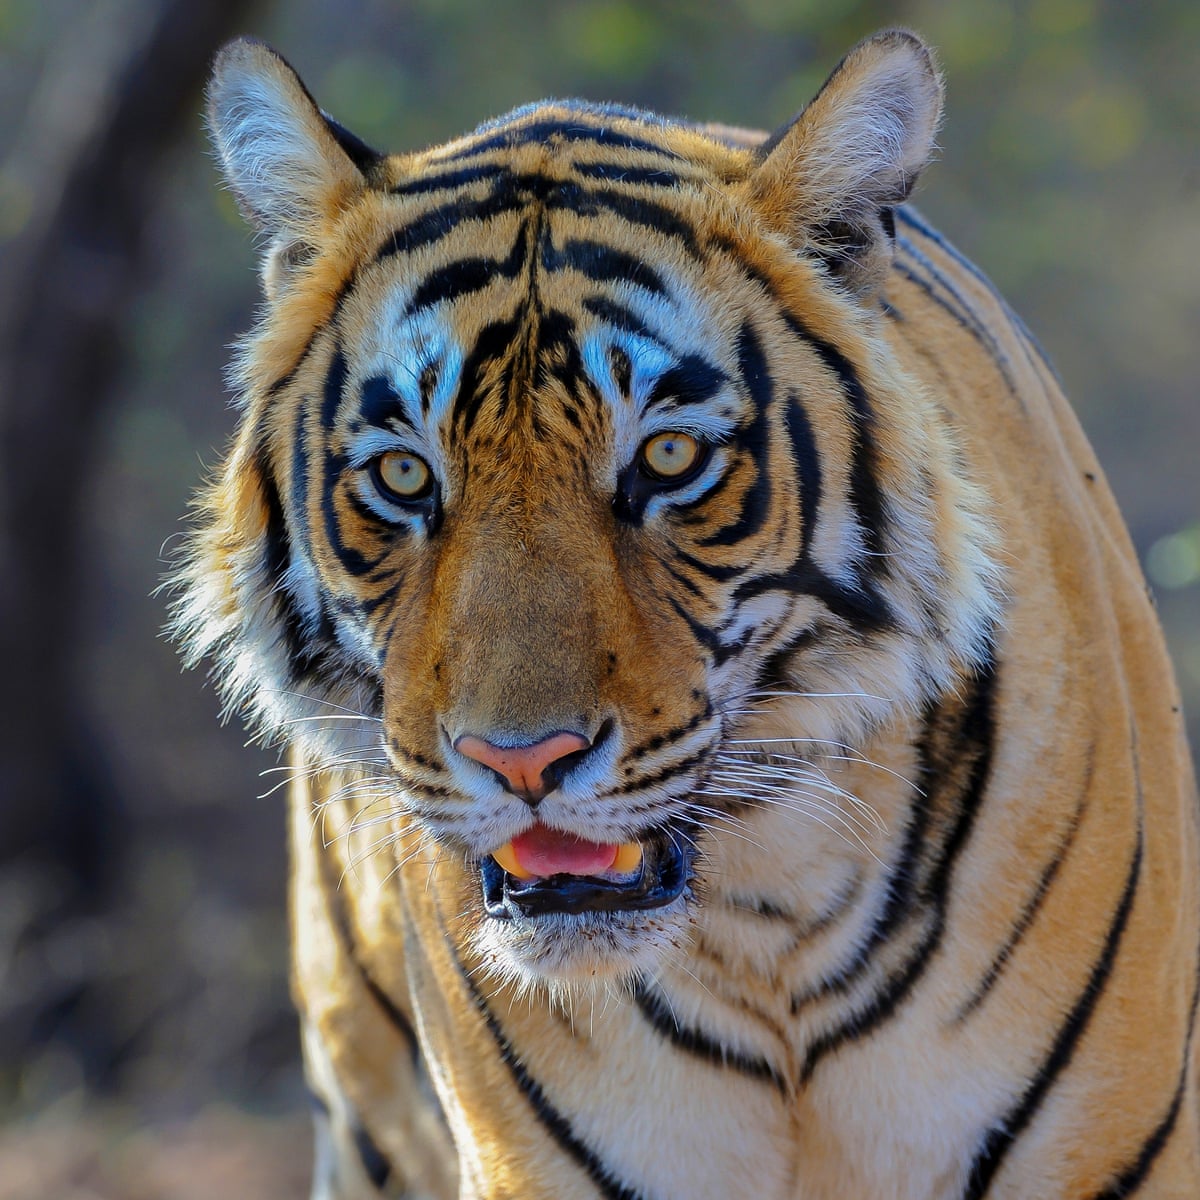 Calvin Klein fragrance could be used to lure killer tiger | India | The  Guardian